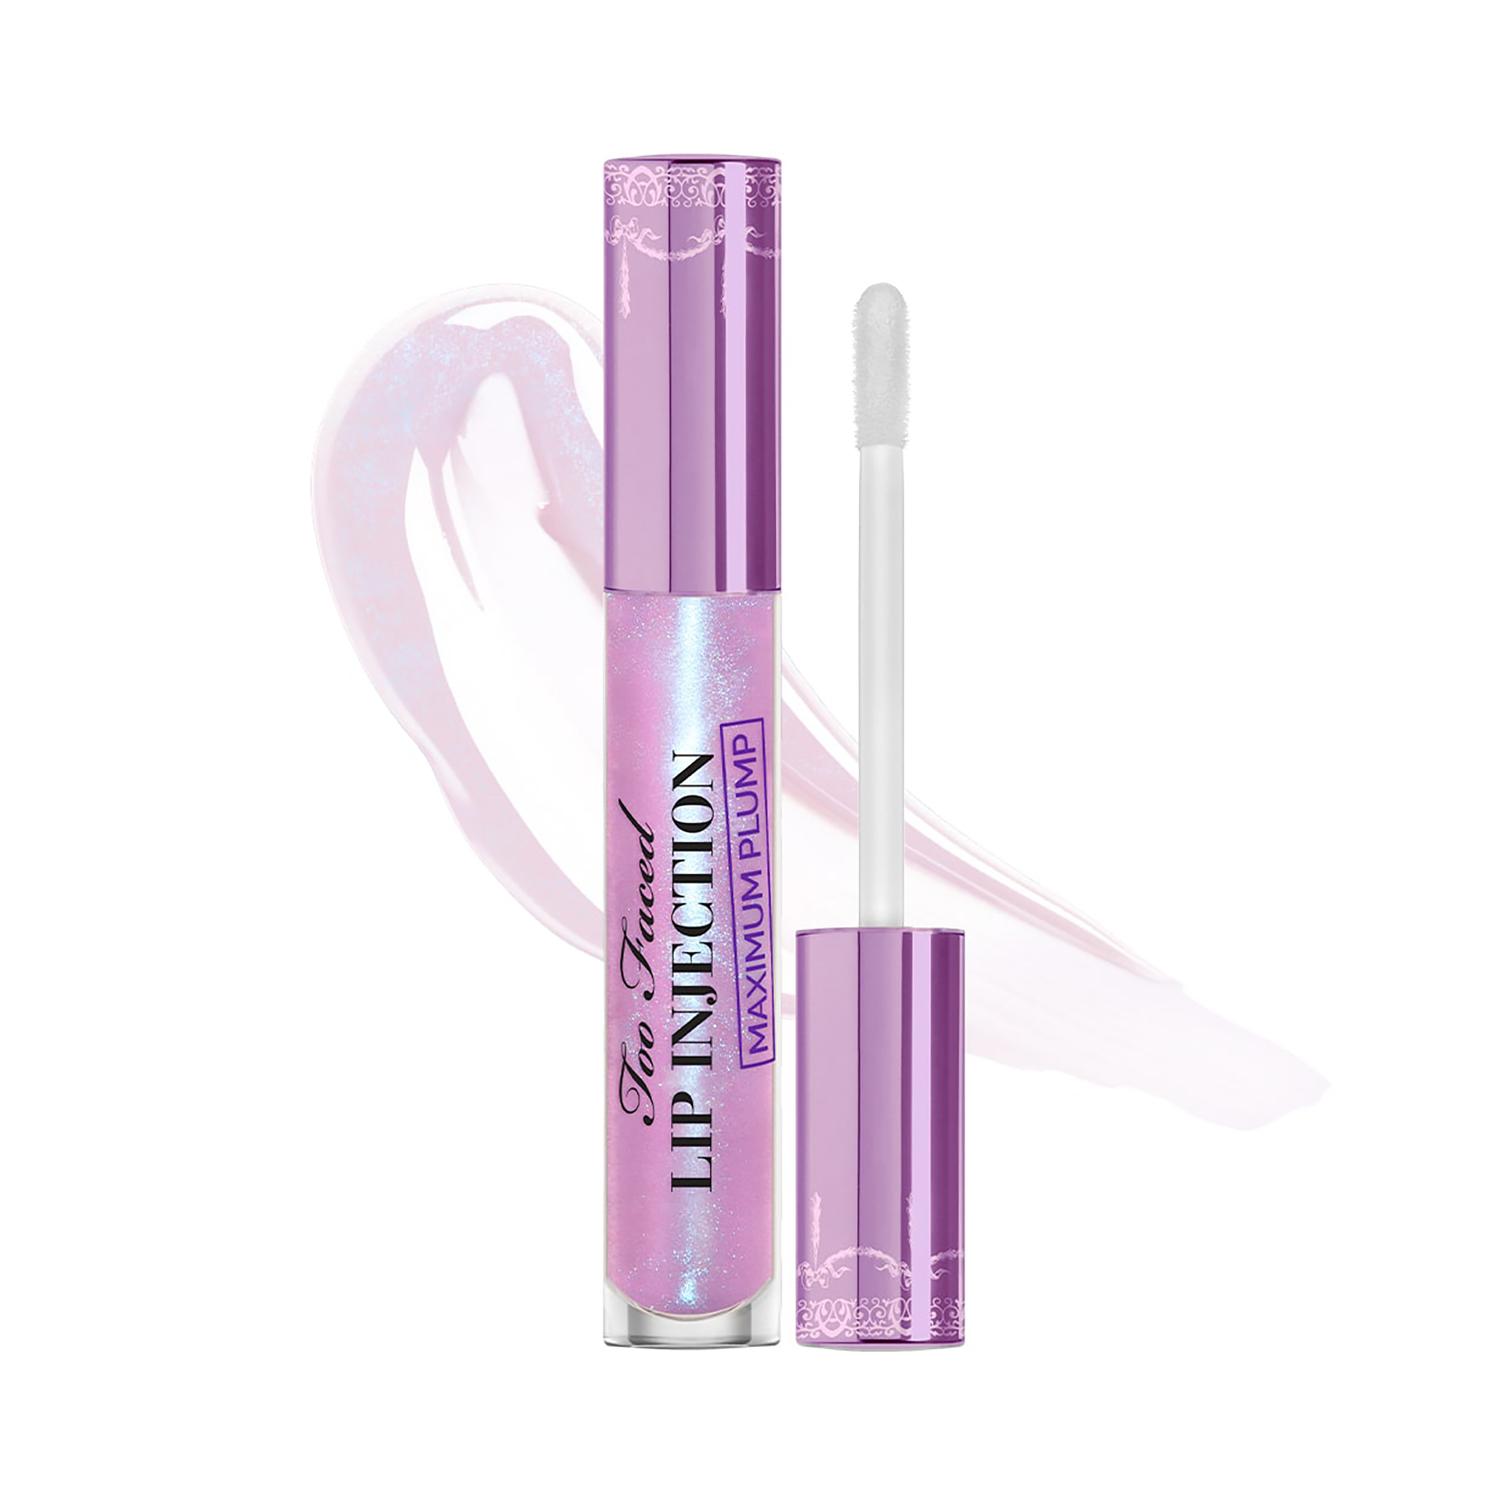 Too Faced | Too Faced Lip Injection Maximum Plump Lip Plumper - Blueberry Buzz (4g)